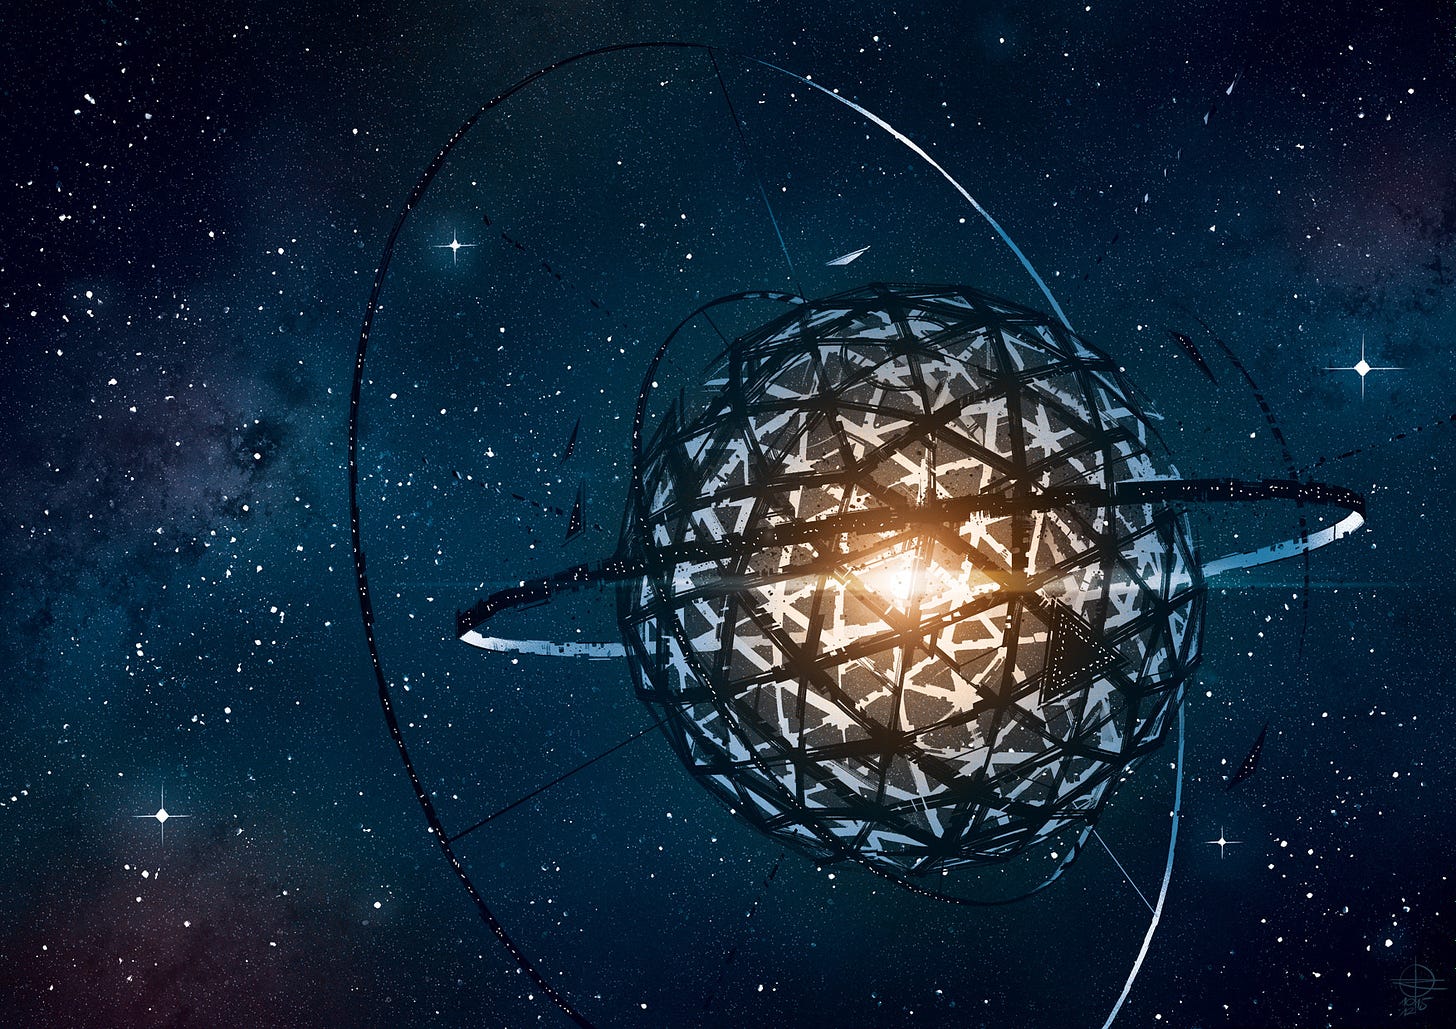 Could we use a Dyson sphere to harvest energy around a black hole?